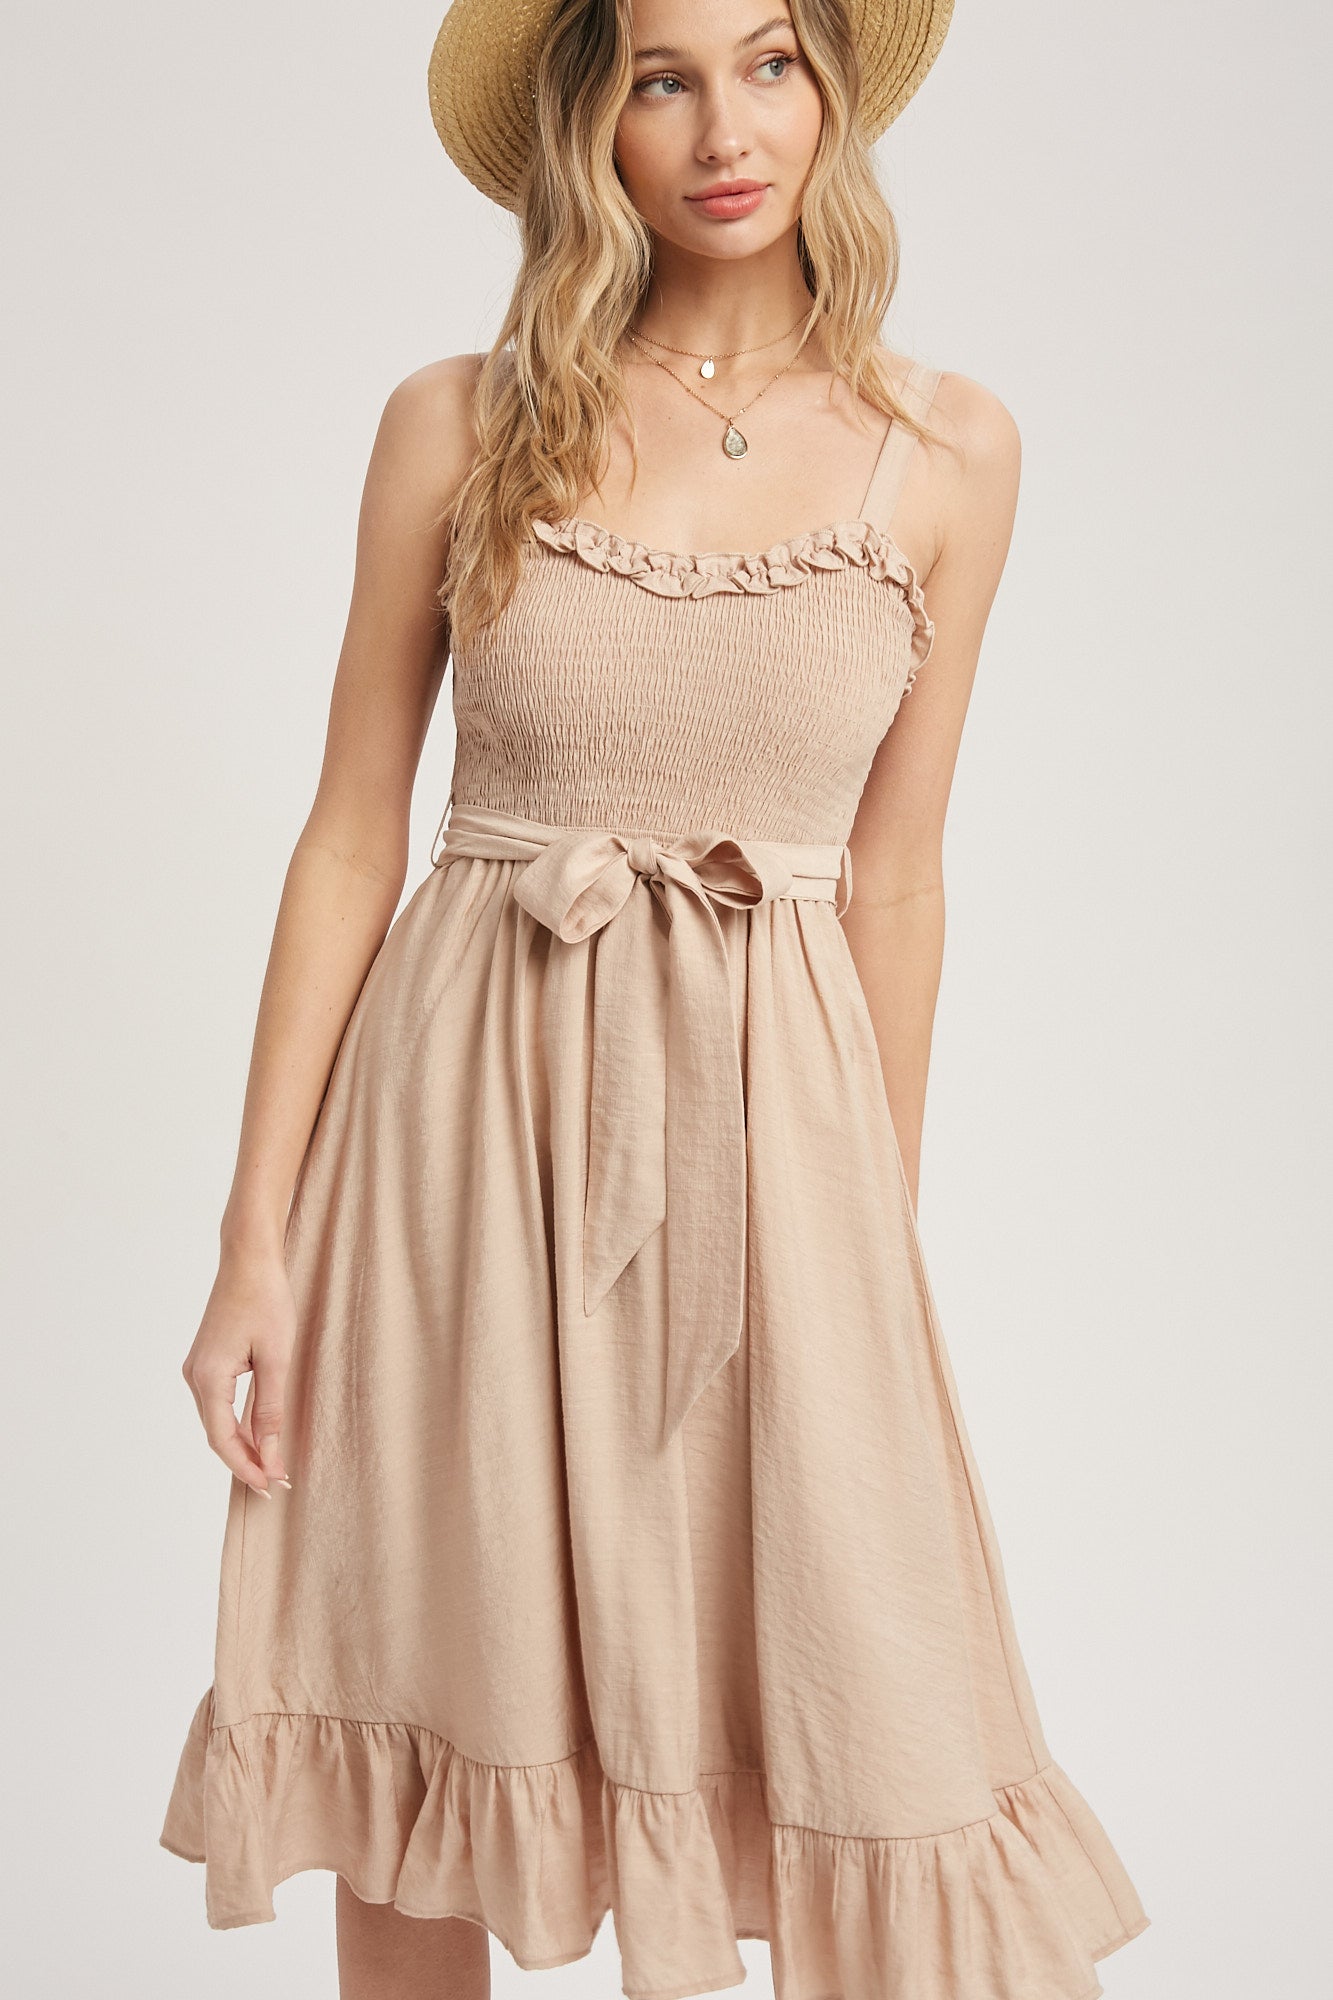 Midi Dress in Latte Color With Ruffles